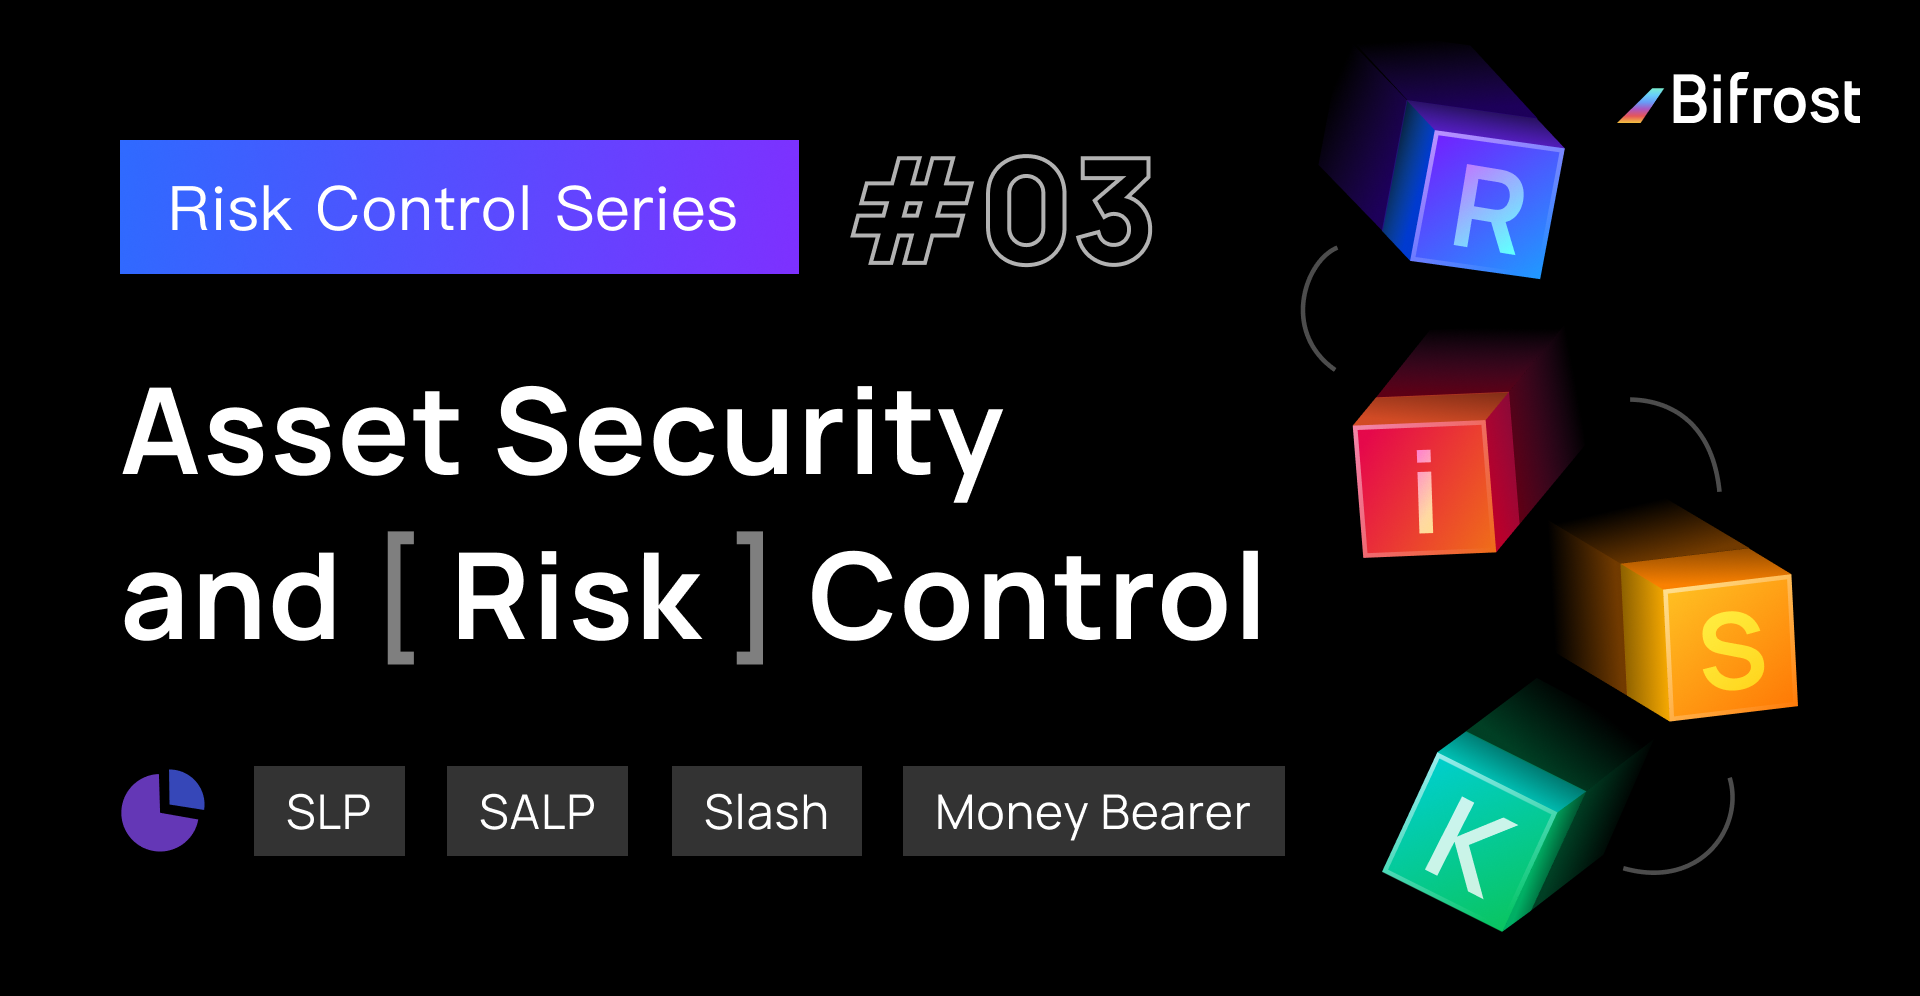 Risk Control Series III: Multi-level risk prevention and control measures for capital security